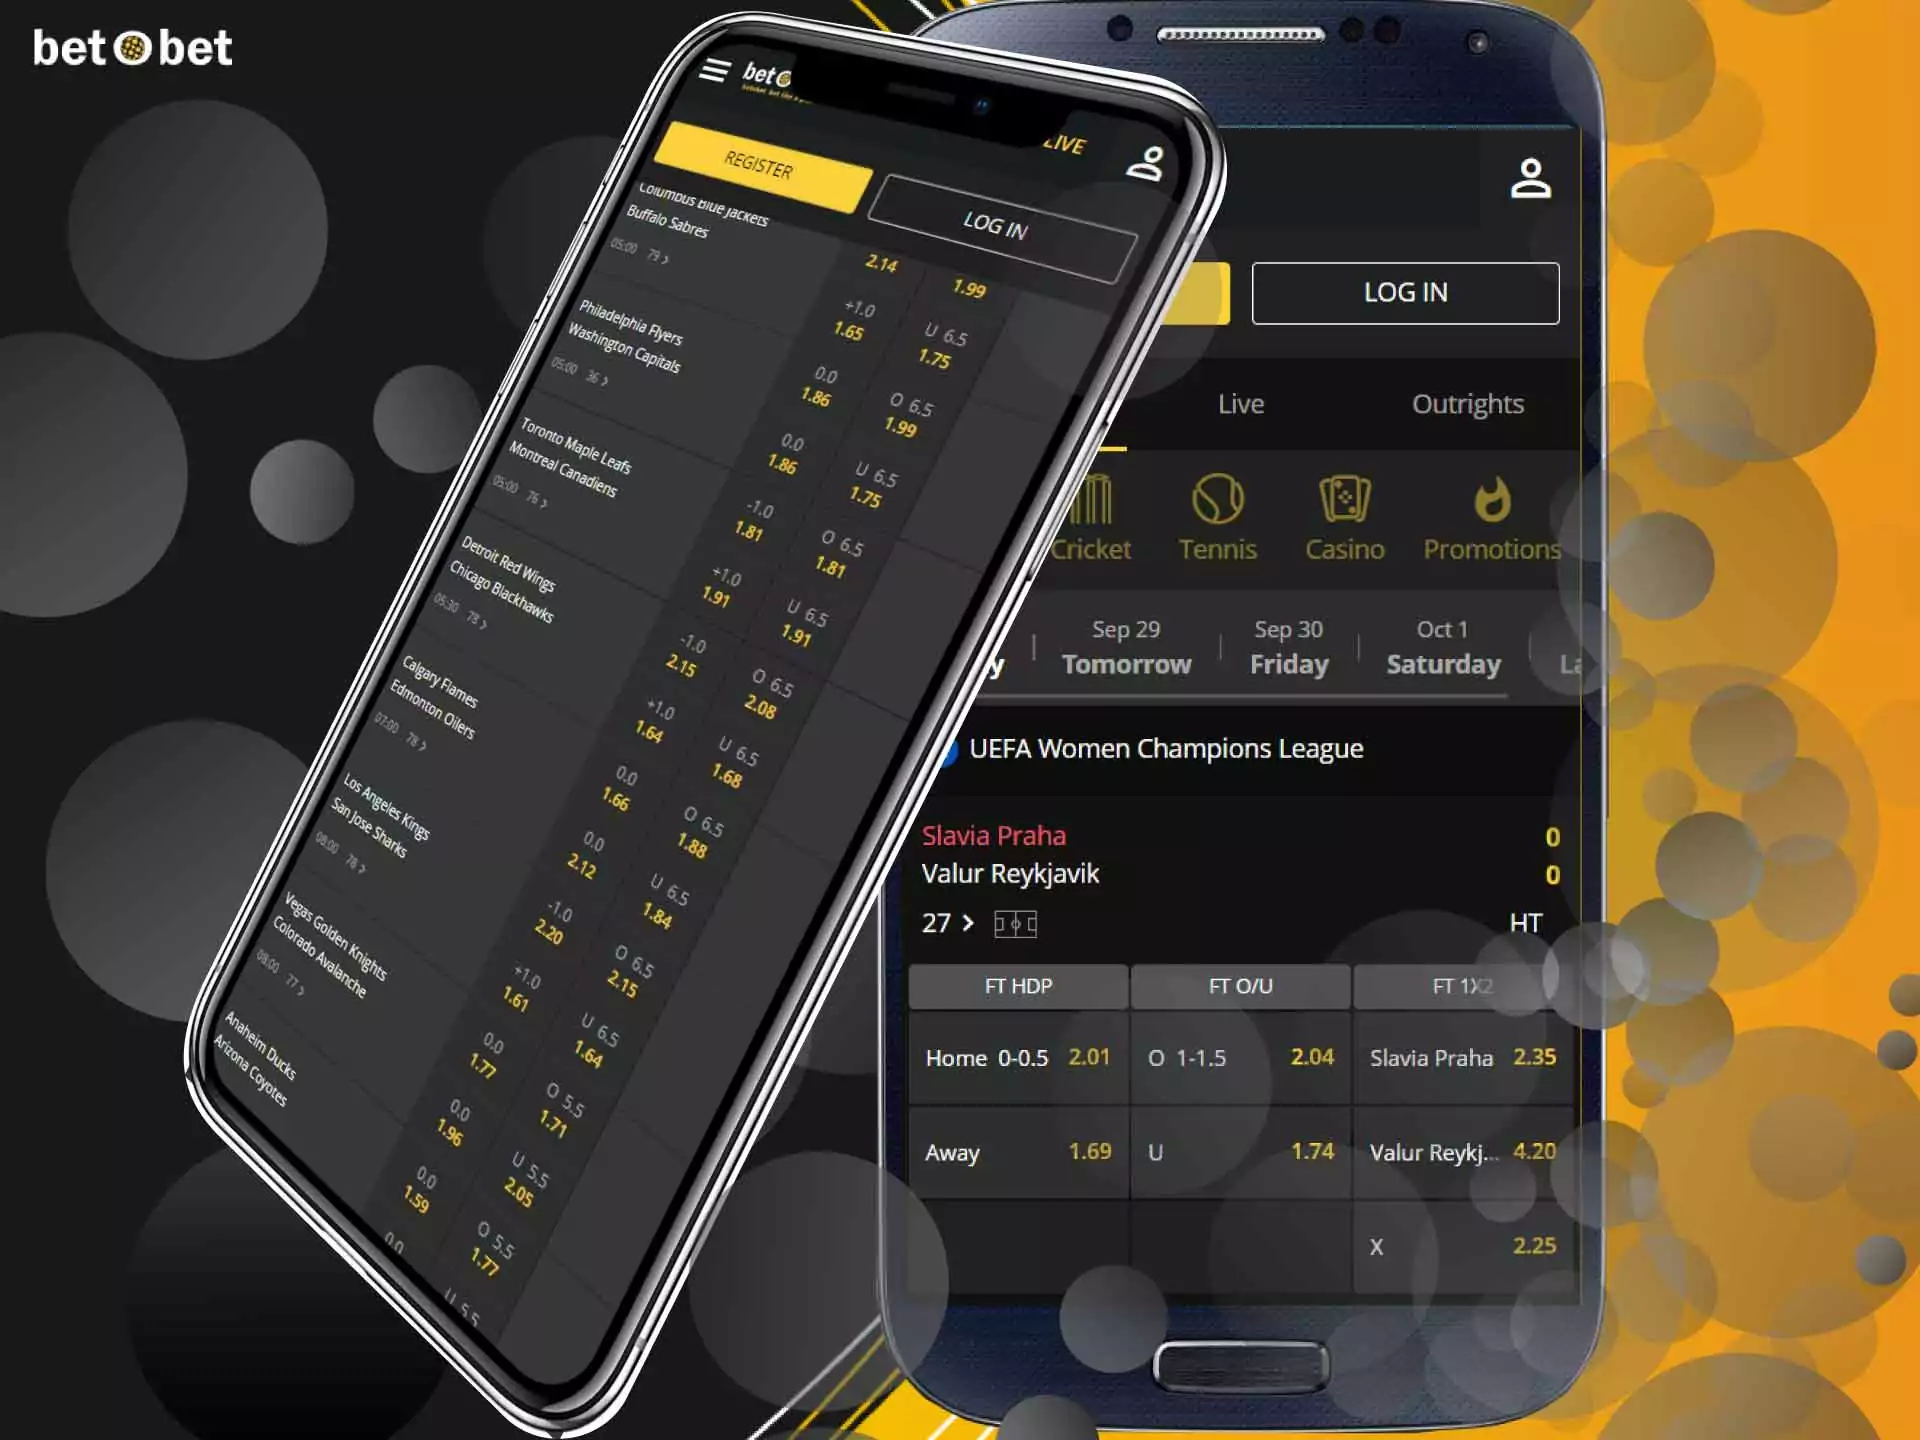 BetOBet app is the great option to bet on sports whenever you want.